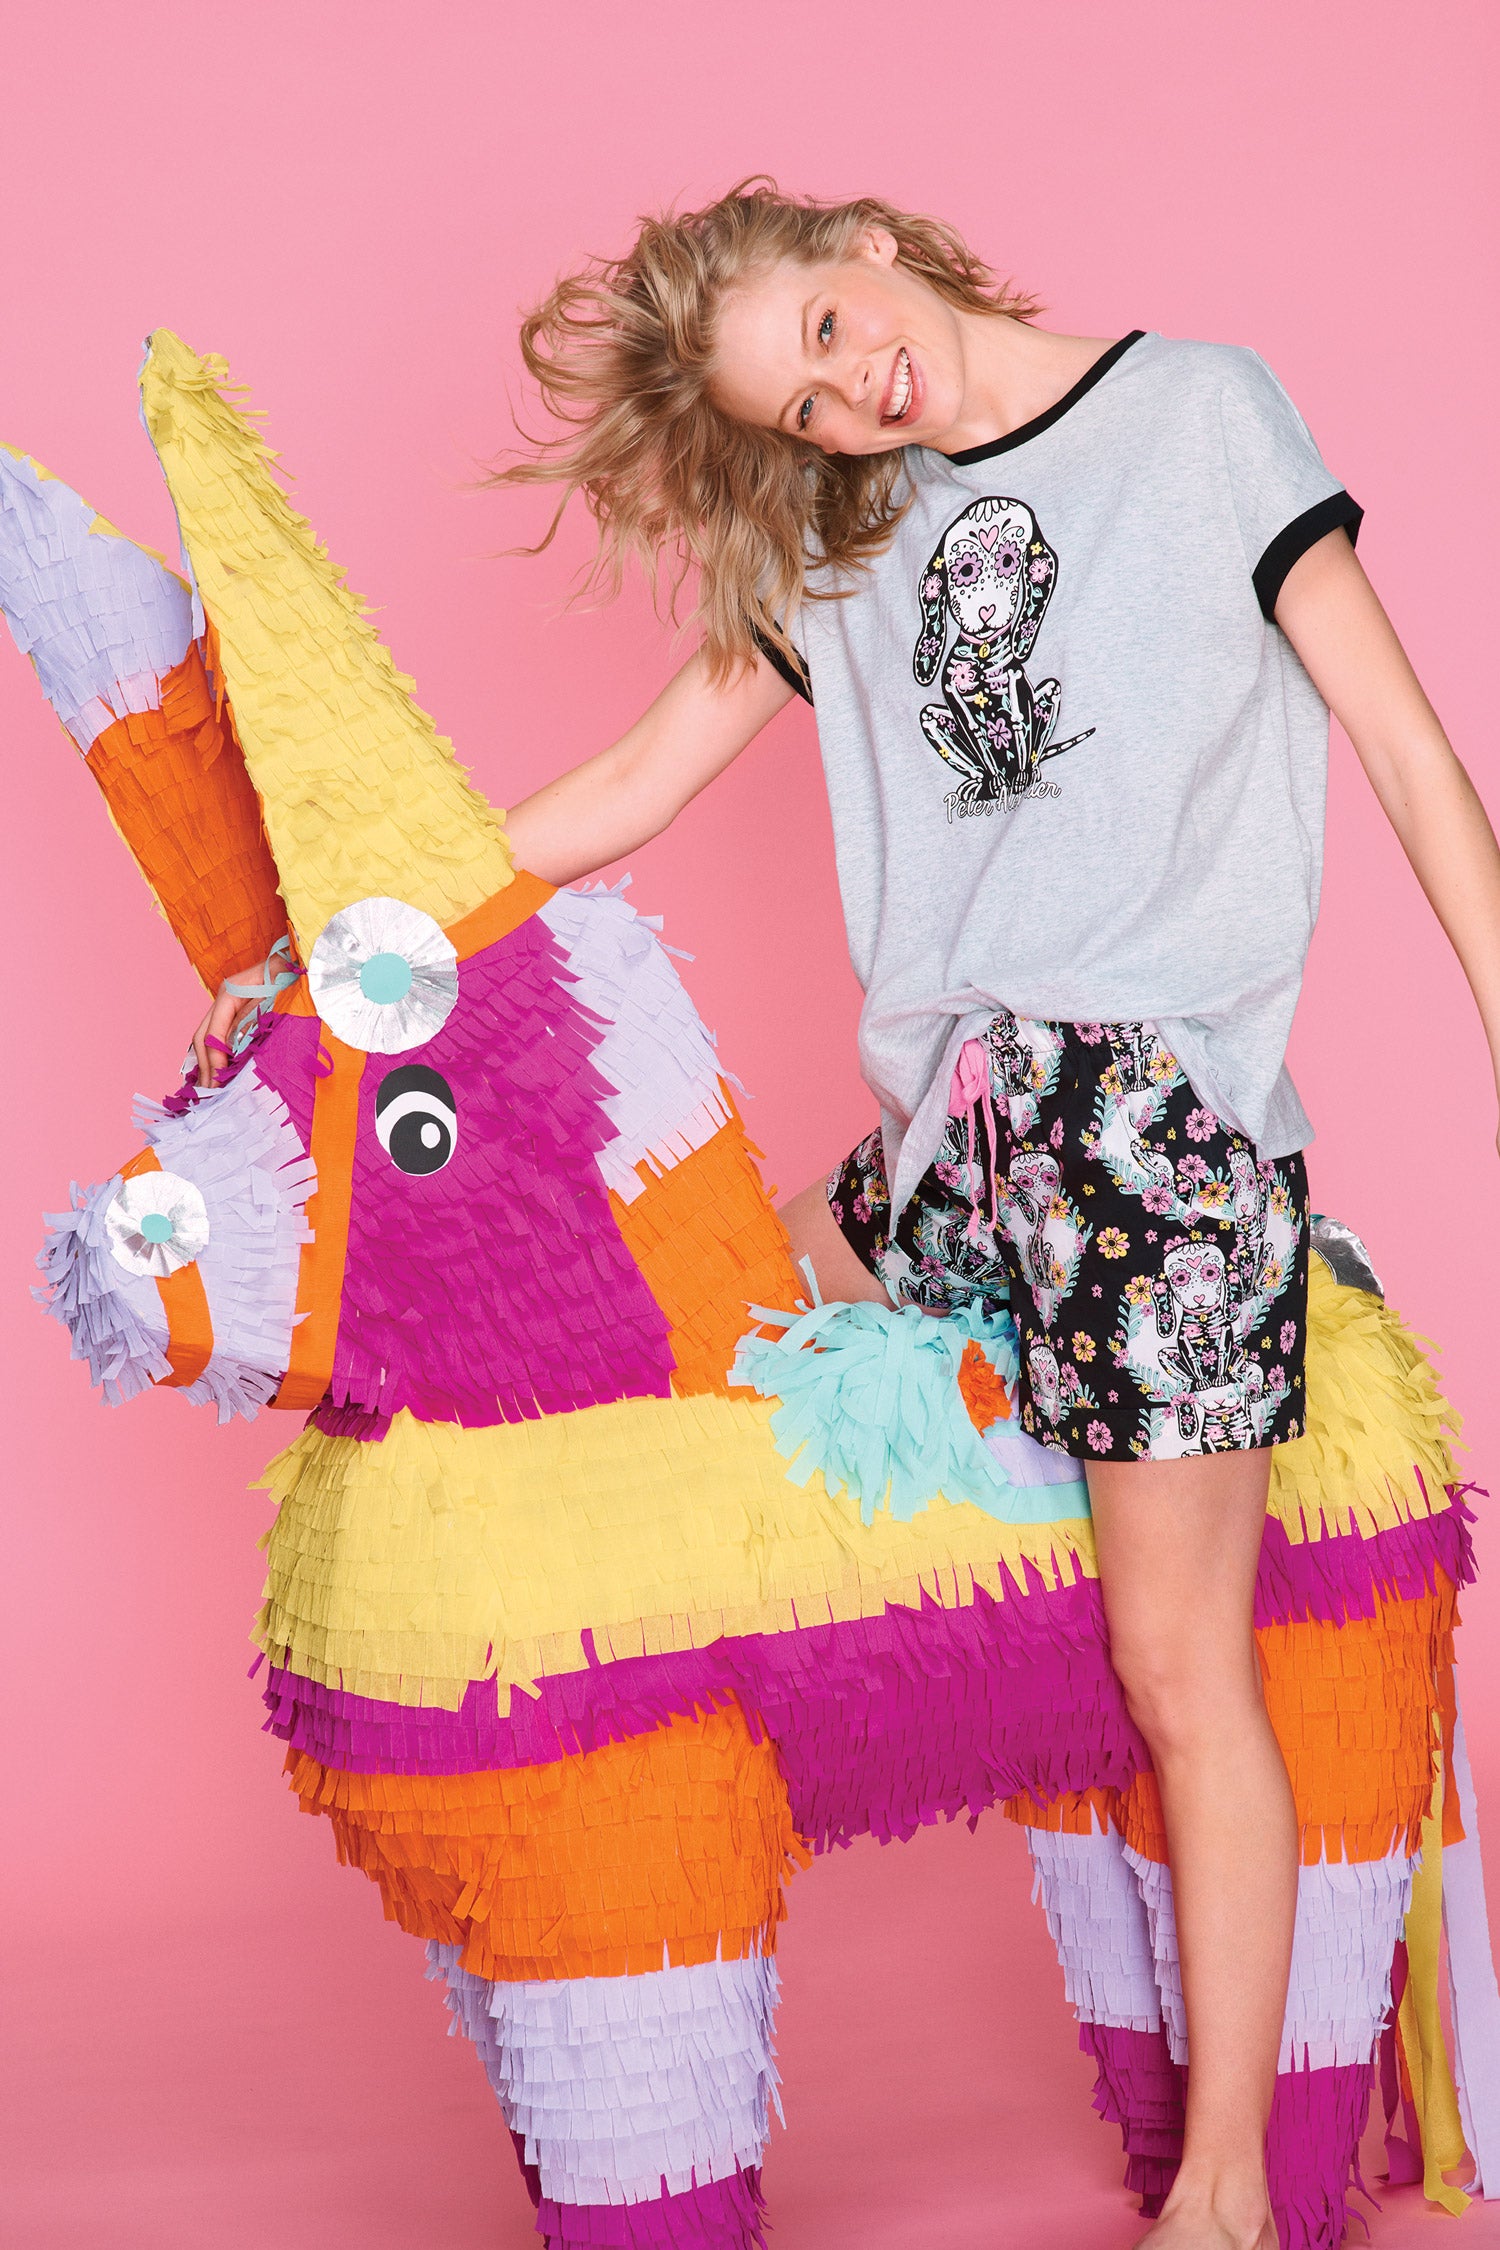 A giant, colorful, oversized, handmade donkey piñata stands against a pink background. A woman in piñata-themed pajamas is riding the donkey.